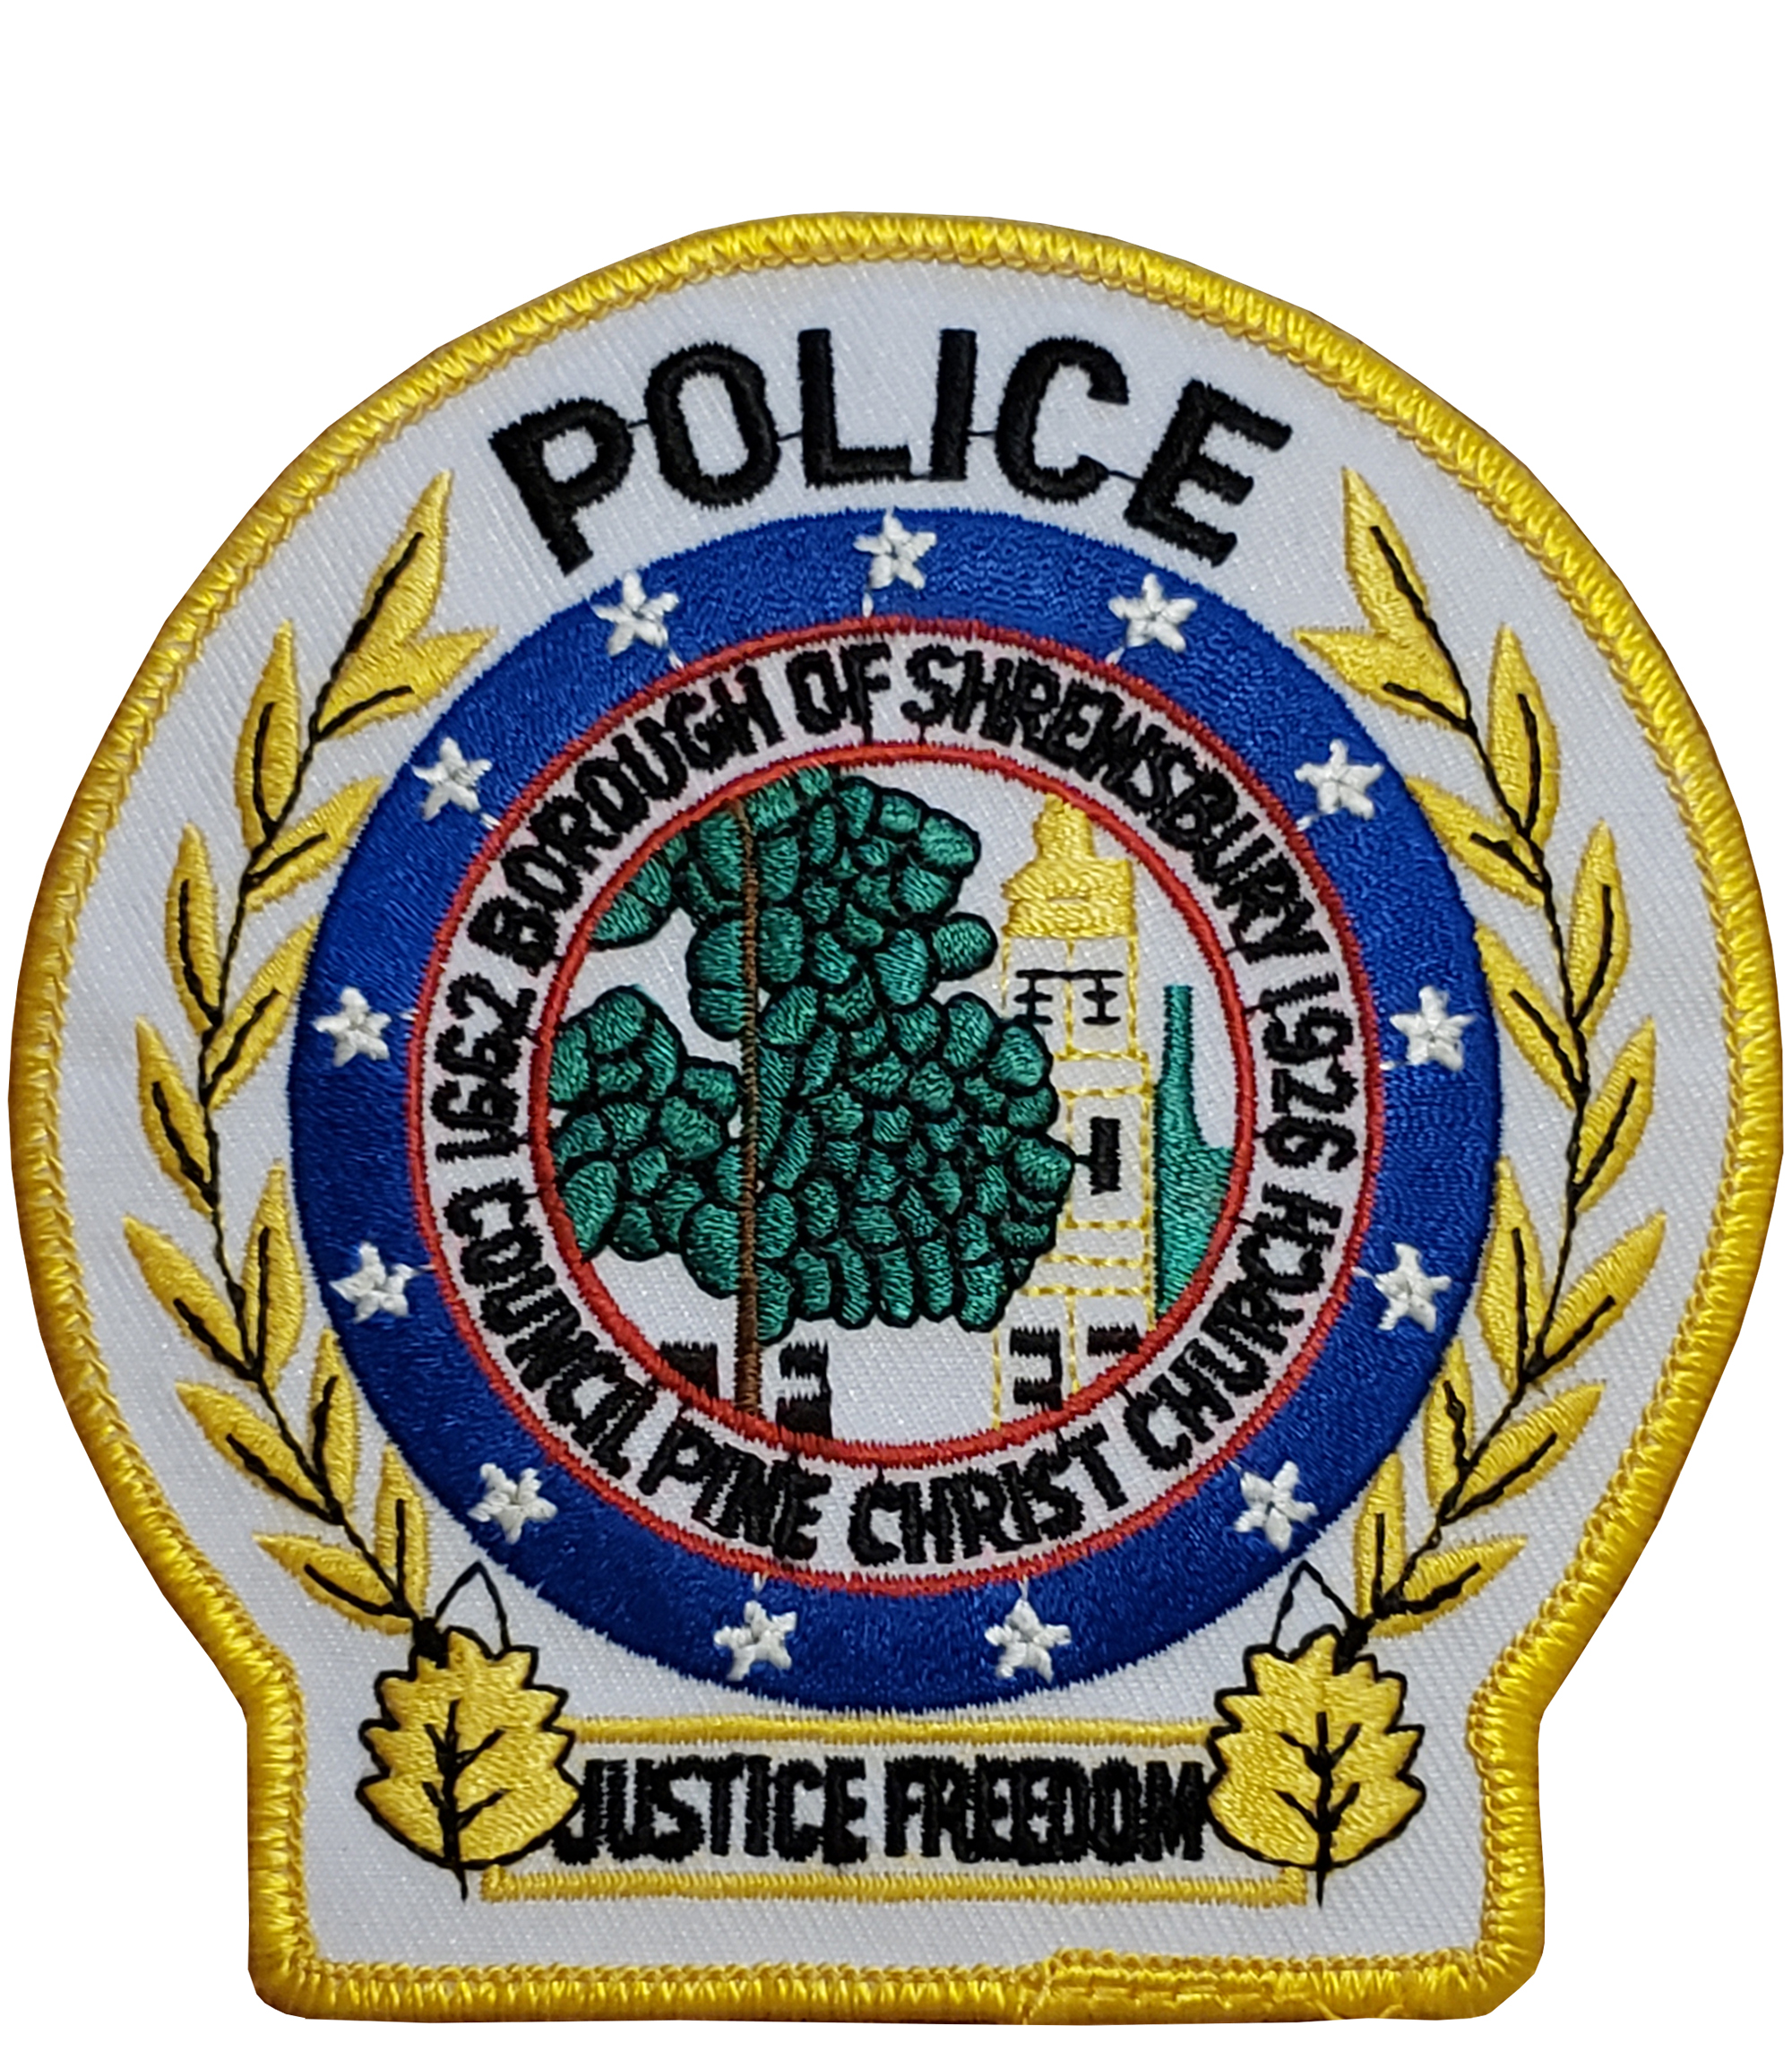 Patch Call: Shrewsbury, New Jersey, Police Department (LEAD)